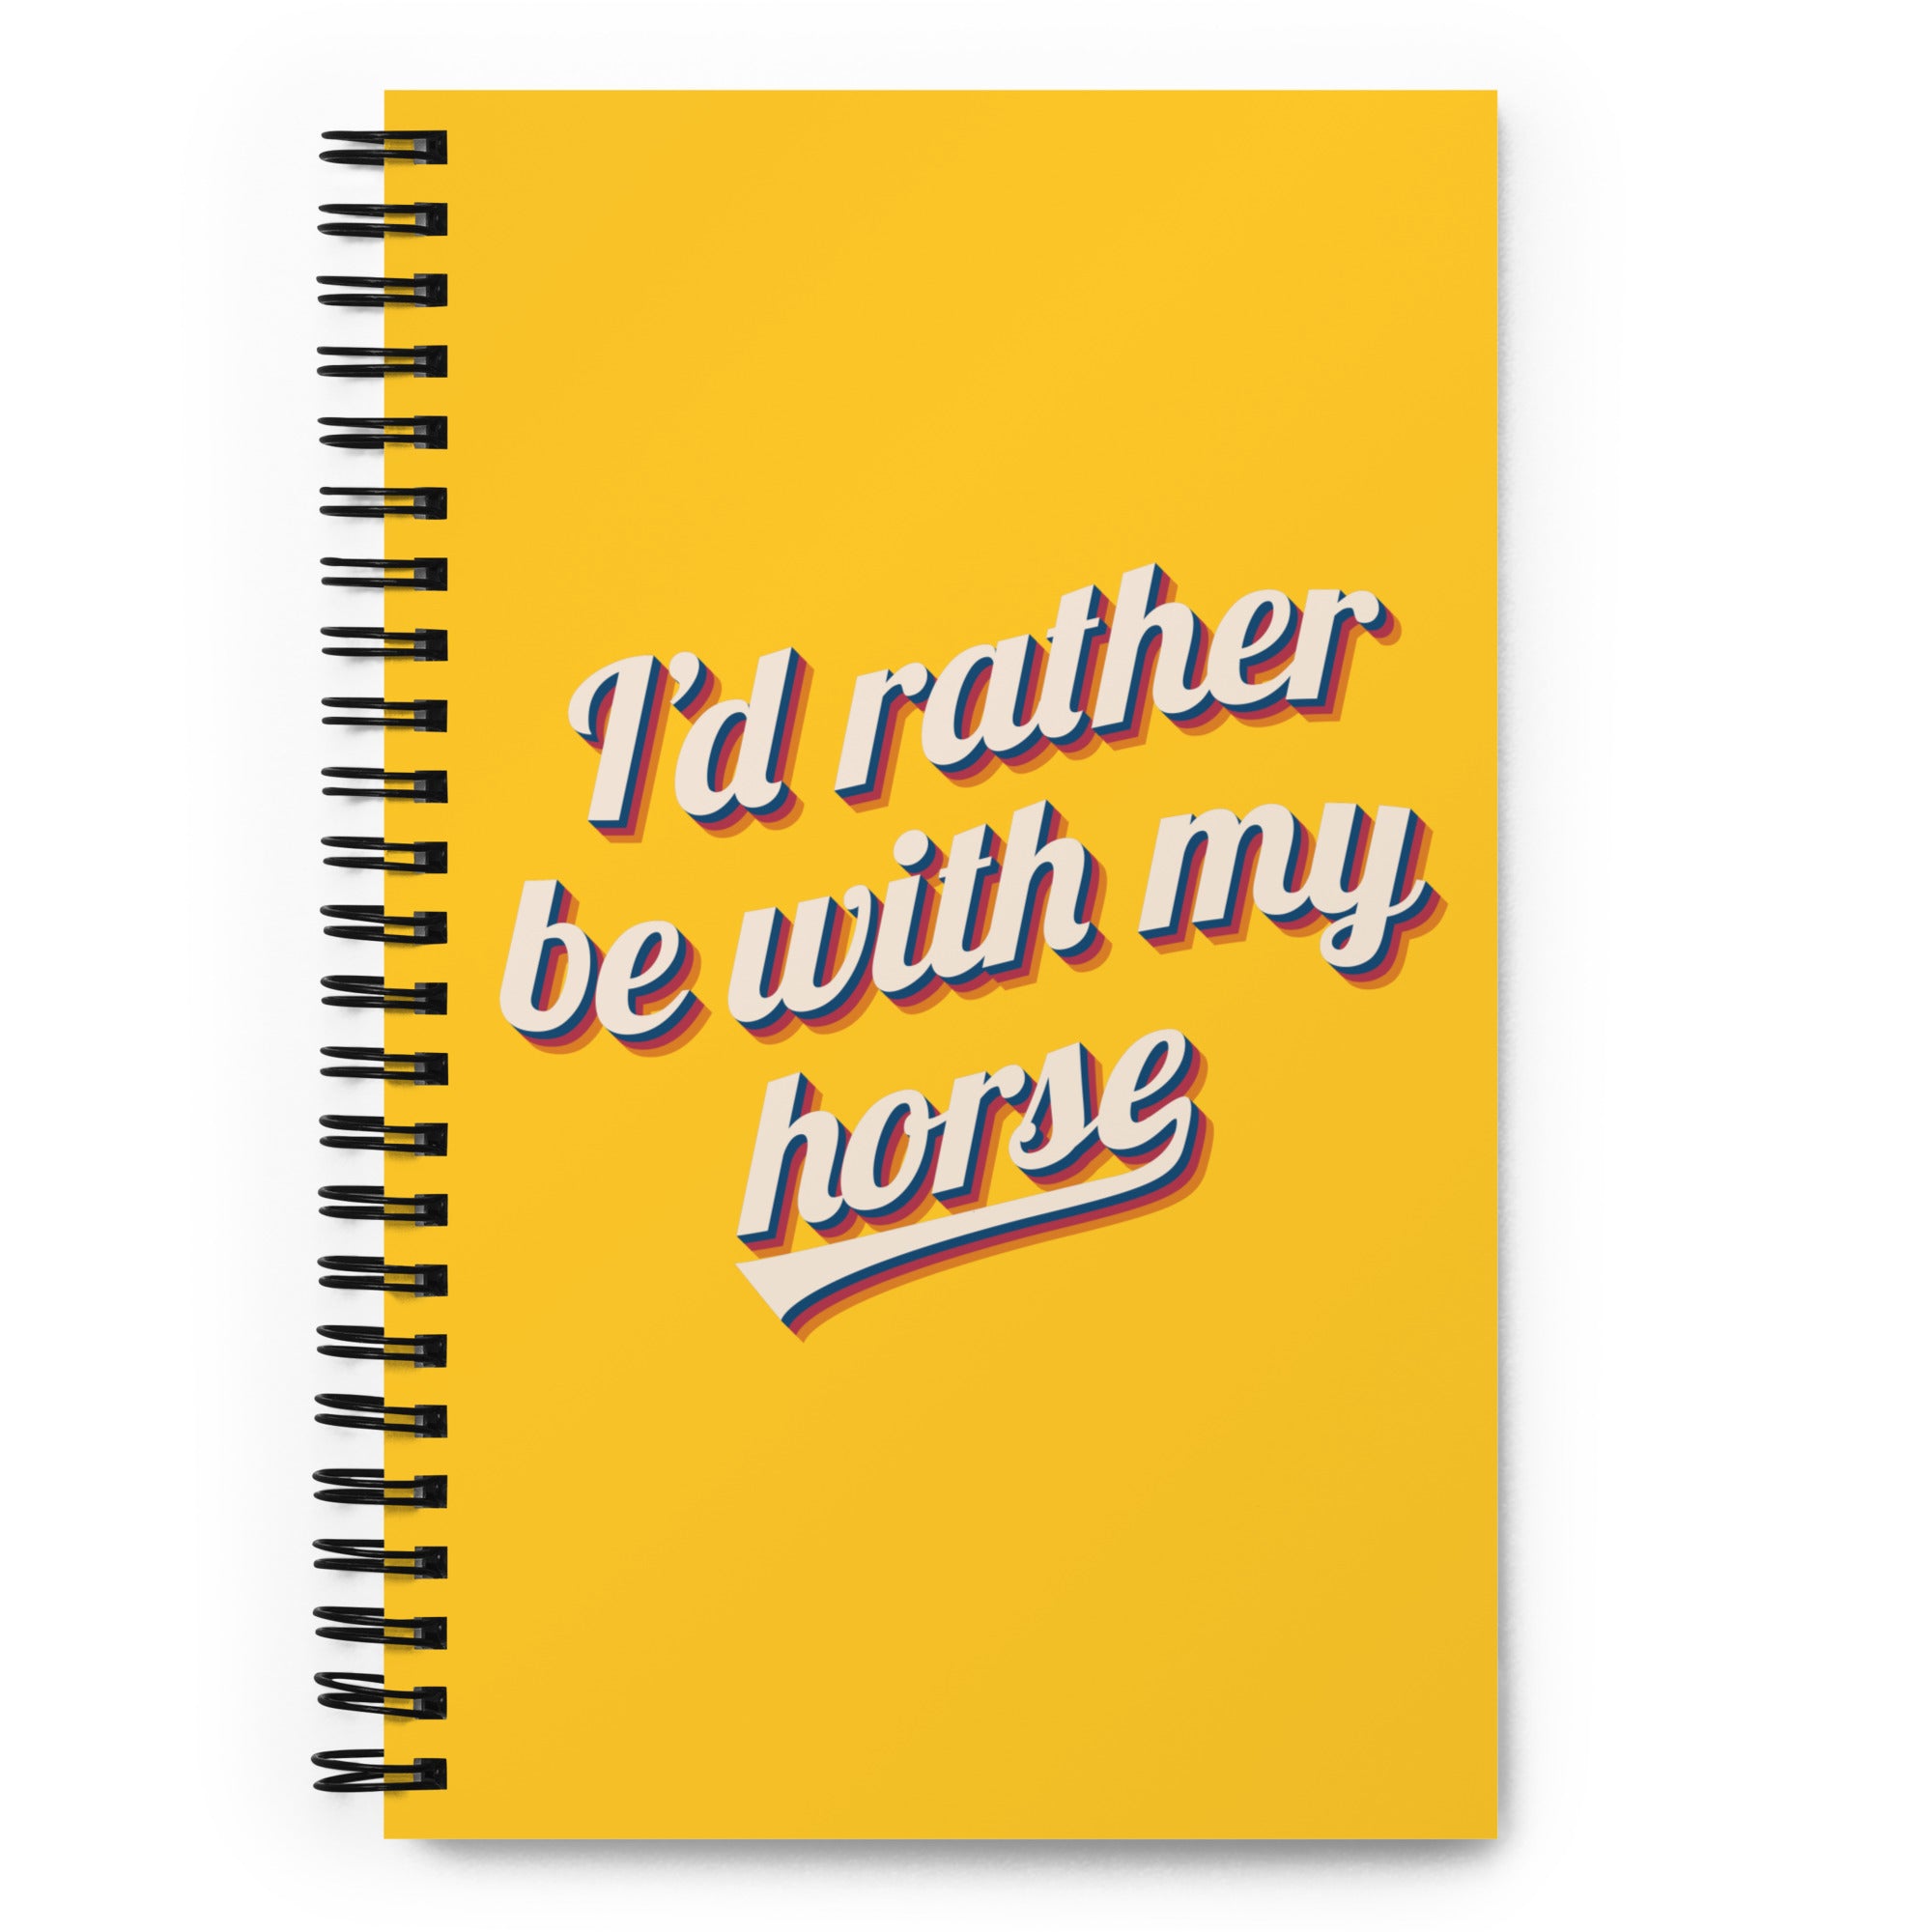 I'd rather be with my horse Spiral notebook FEI Official Store